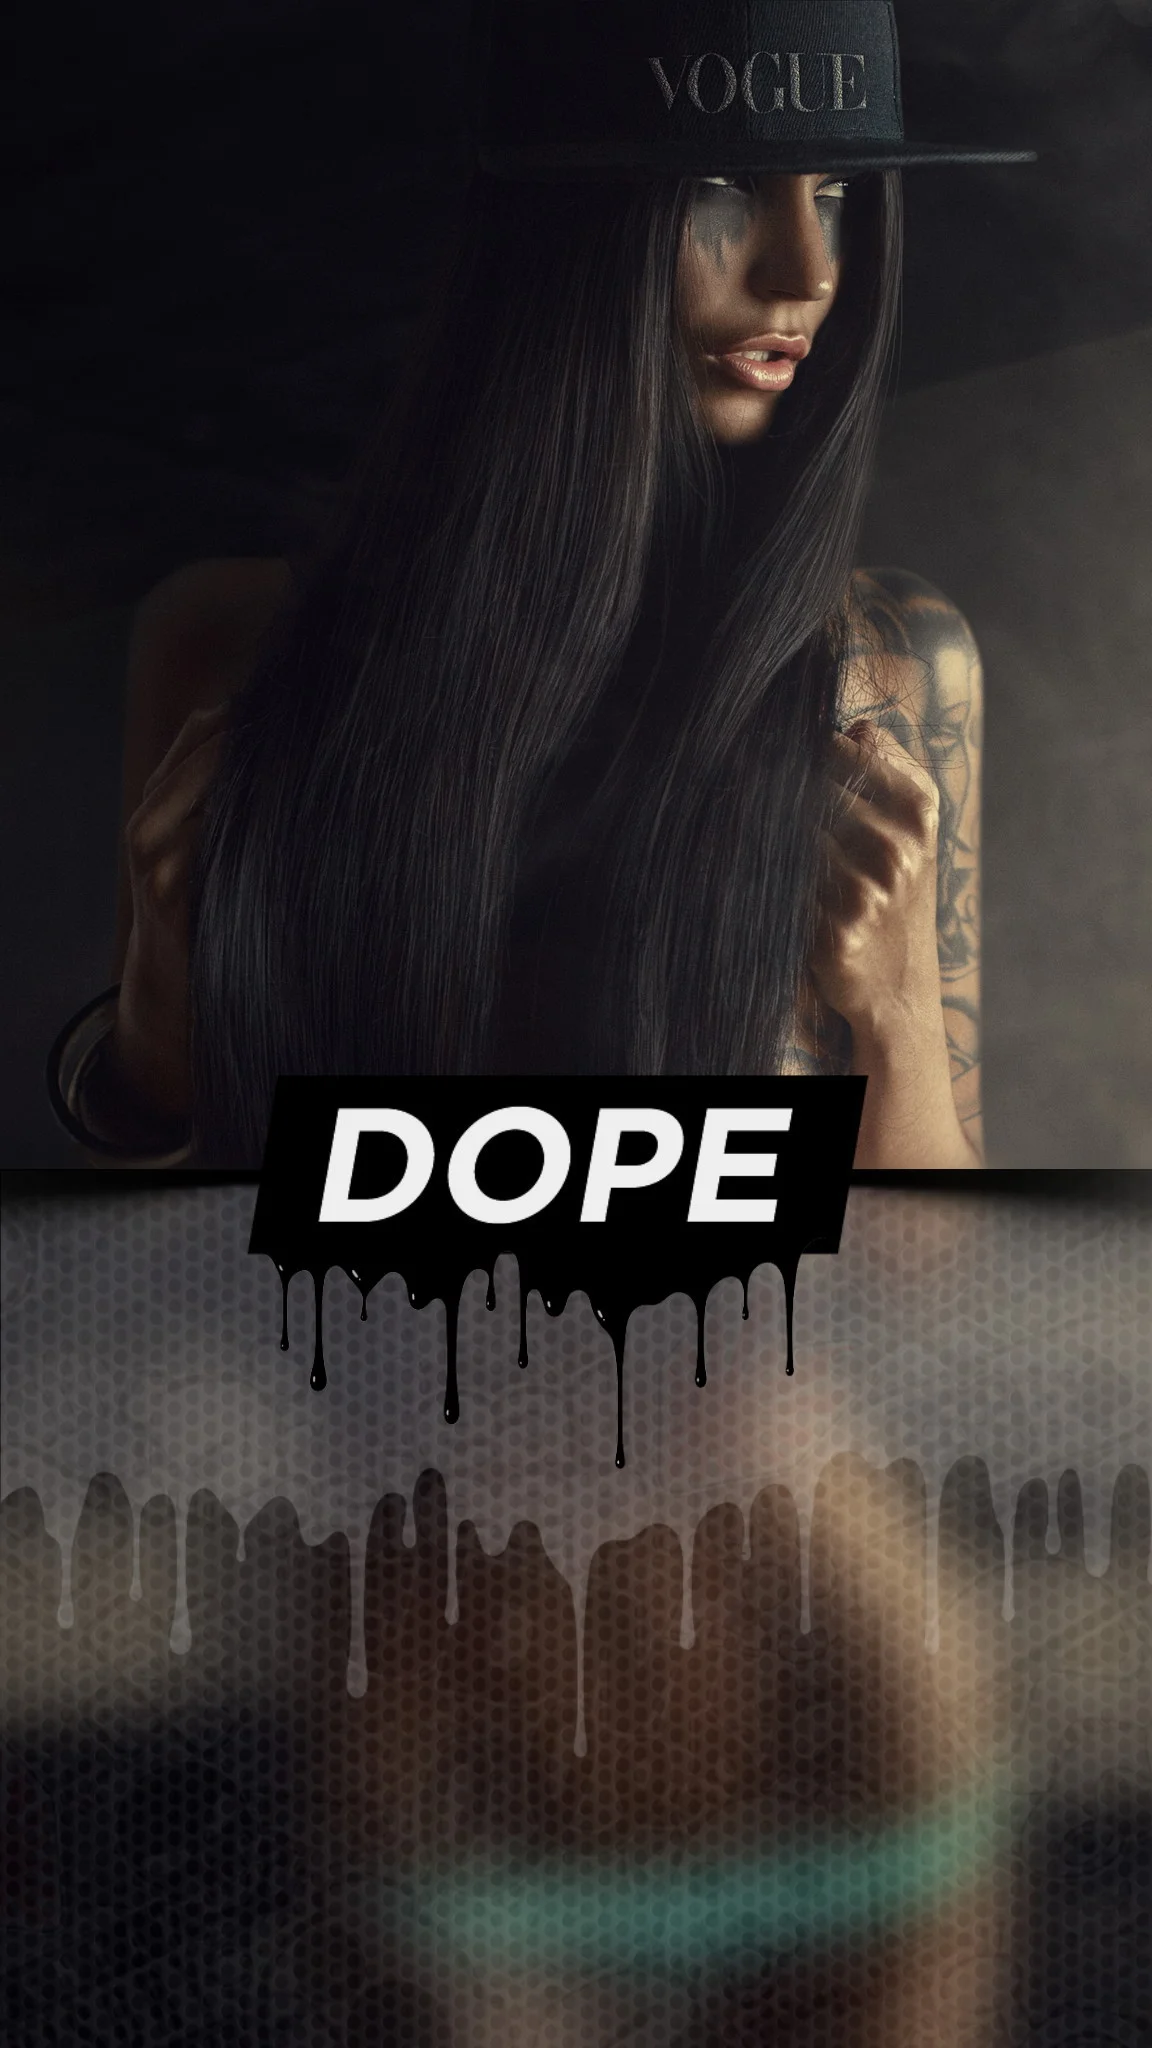 Girls Club, Bad Girls, Dope Wallpapers, Iphone Wallpapers, Art Girl,  Gangsta Girl, Sexy, Chicano, Hiphop